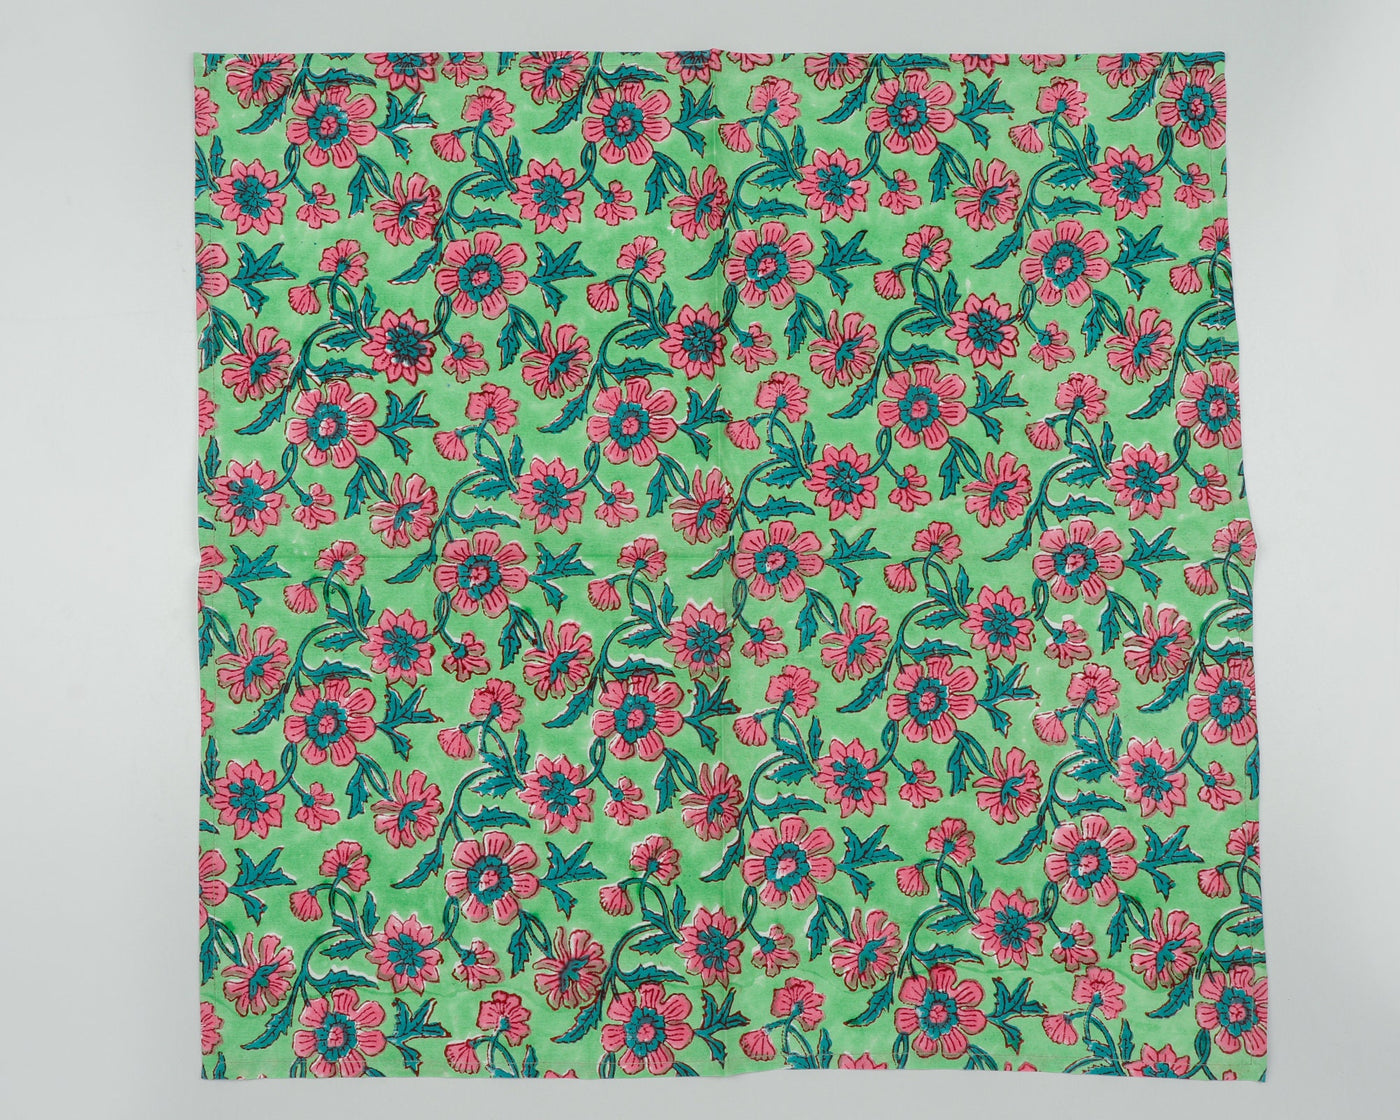 Mint and Pine Green, Salmon Pink Indian Floral Hand Block Printed Pure Cotton Cloth Napkins, 18x18"- Cocktail Napkins, 20x20"- Dinner Napkins